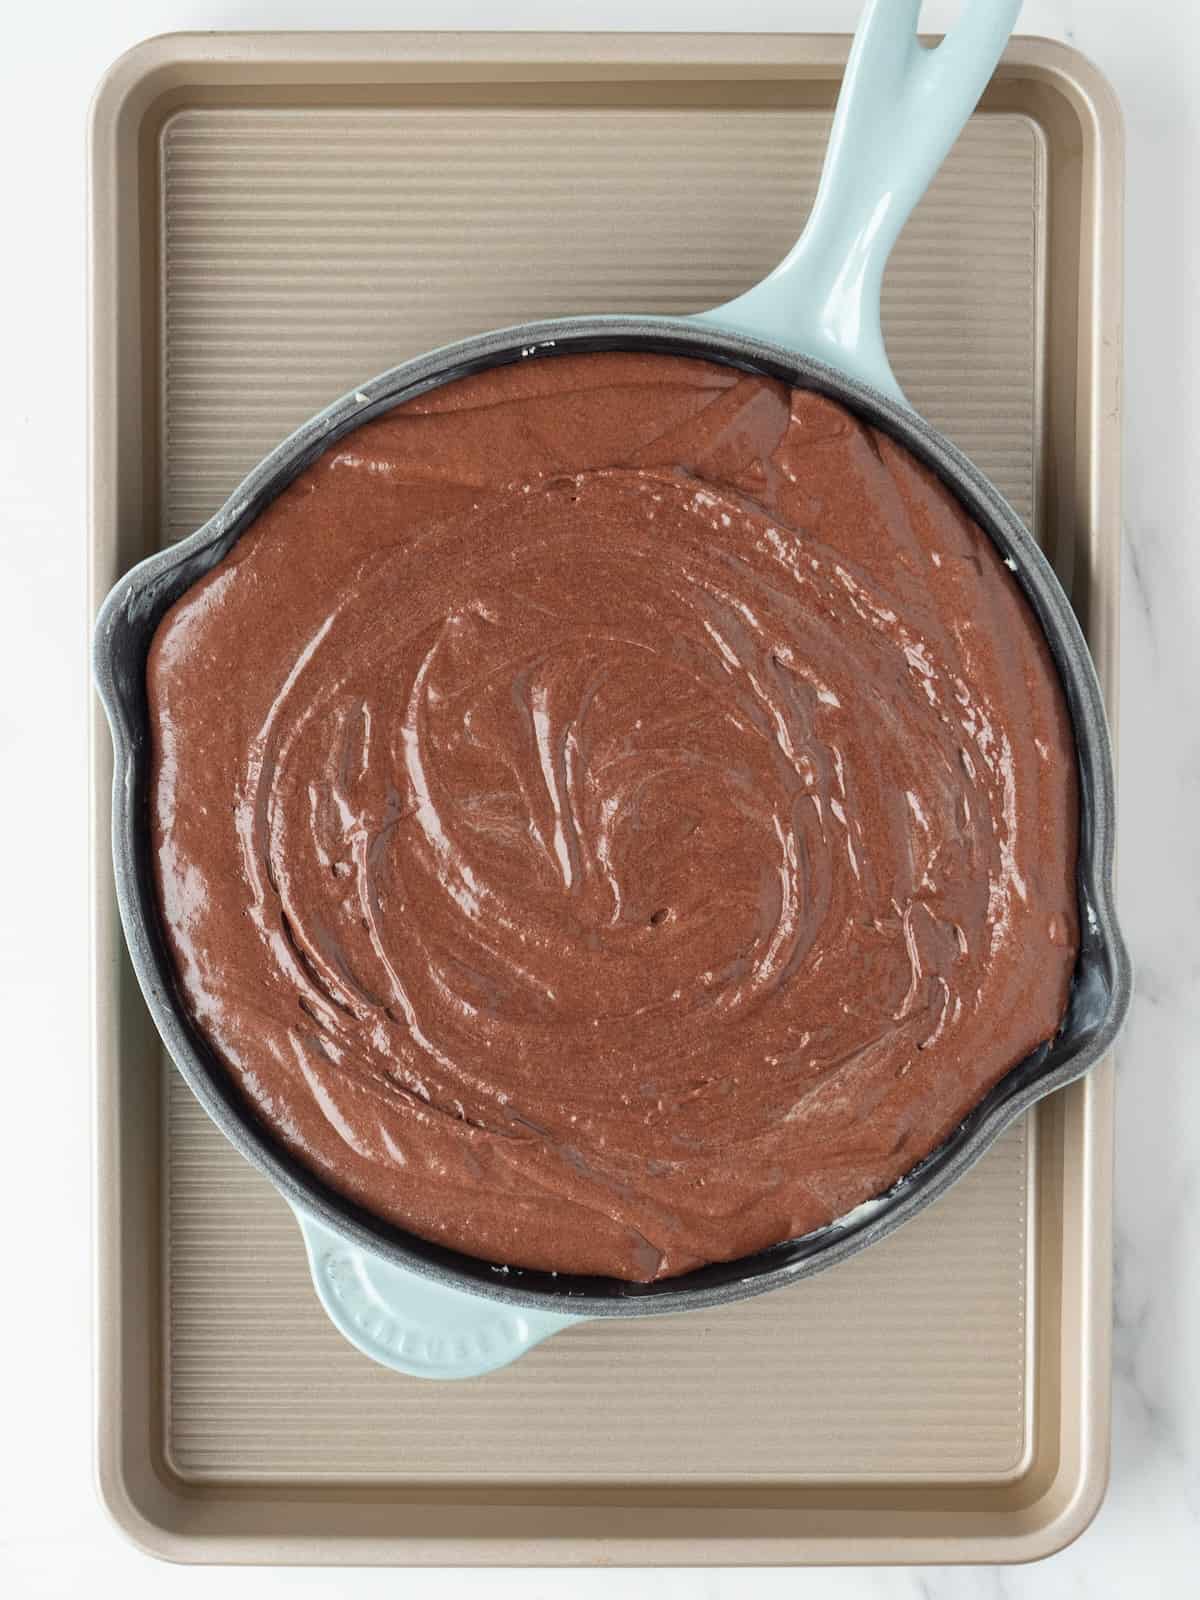 A 9 inch skillet with chocolate brownie pudding batter, placed in a larger baking pan with hot water coming halfway up the side of the skillet.